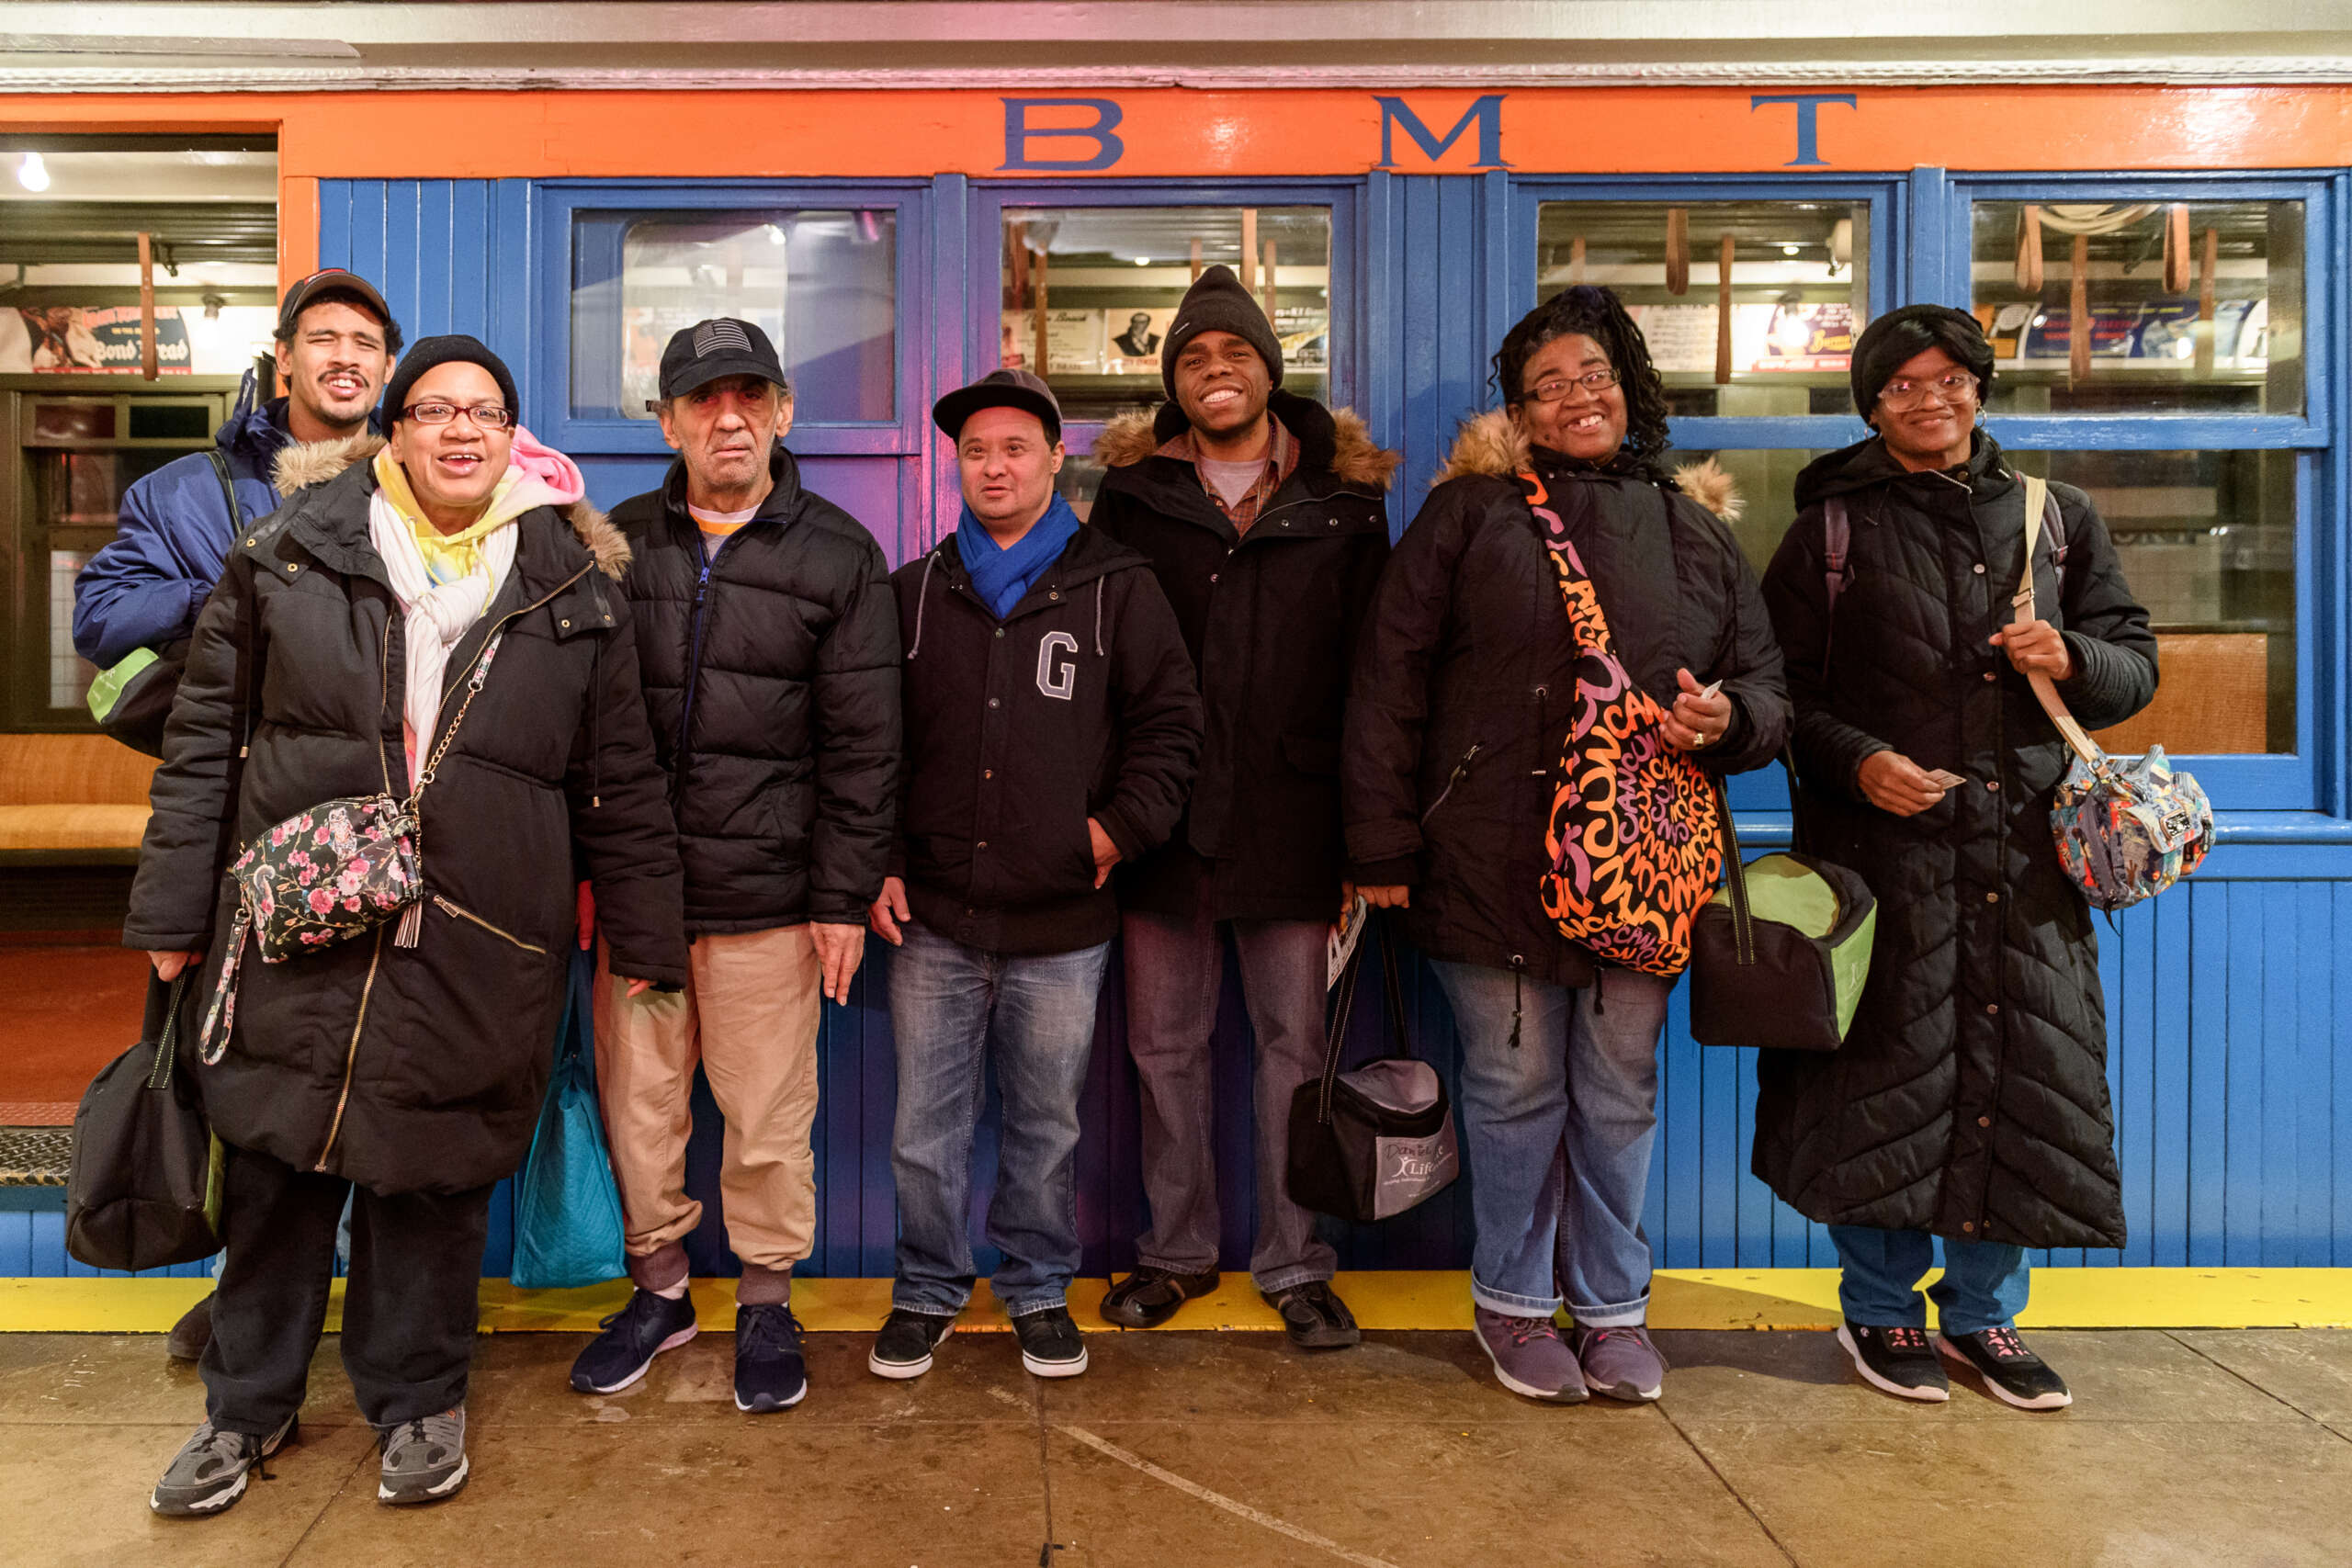 A group of adults stand in front of a blue and orange wooden train car.